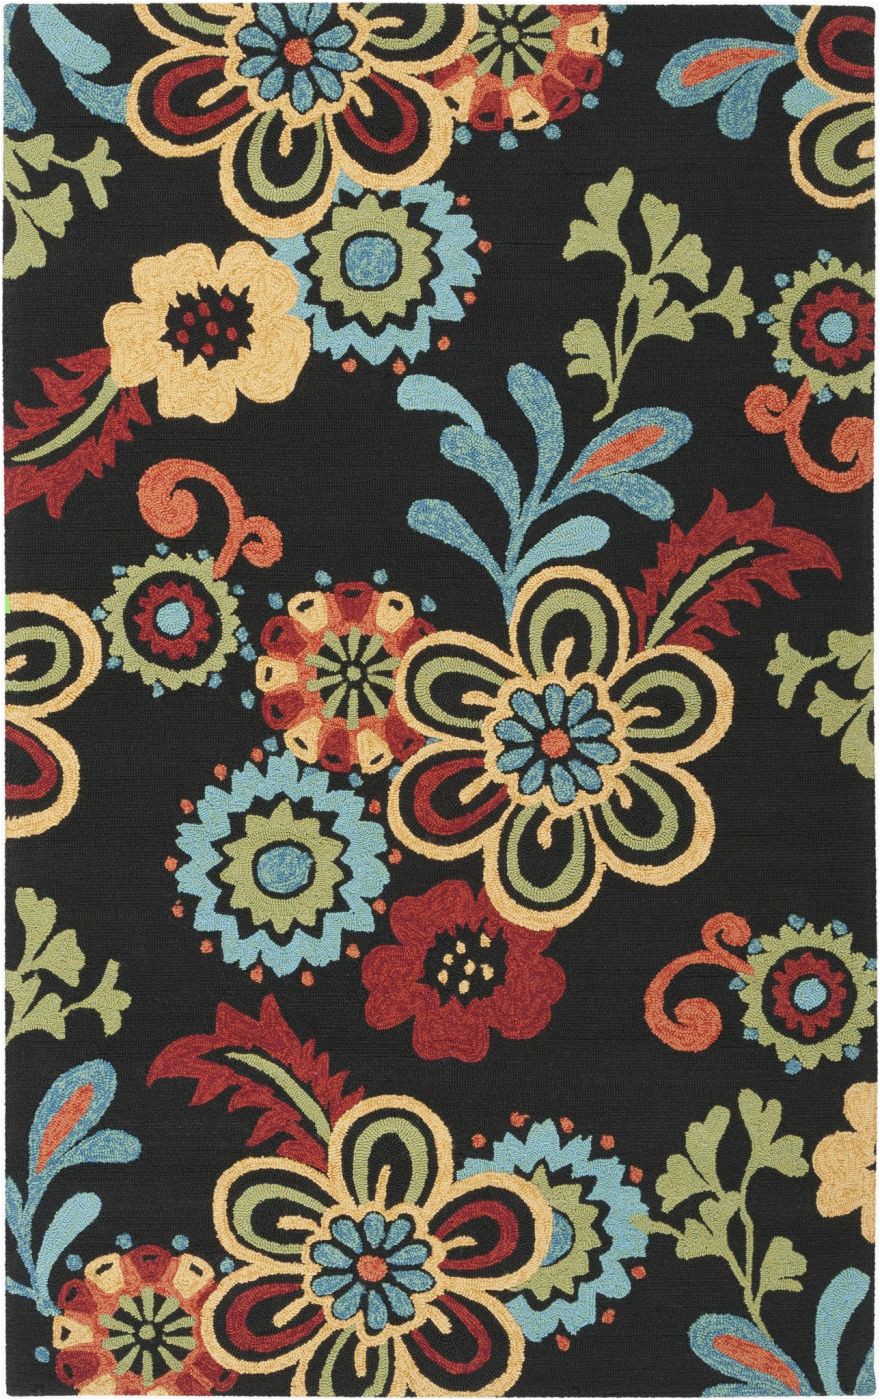 Black Multi Color area Rugs Surya Blowout Sale Up to Off som7707 23 Storm area Rug Black Multi Color Only Ly $79 80 at Contemporary Furniture Warehouse